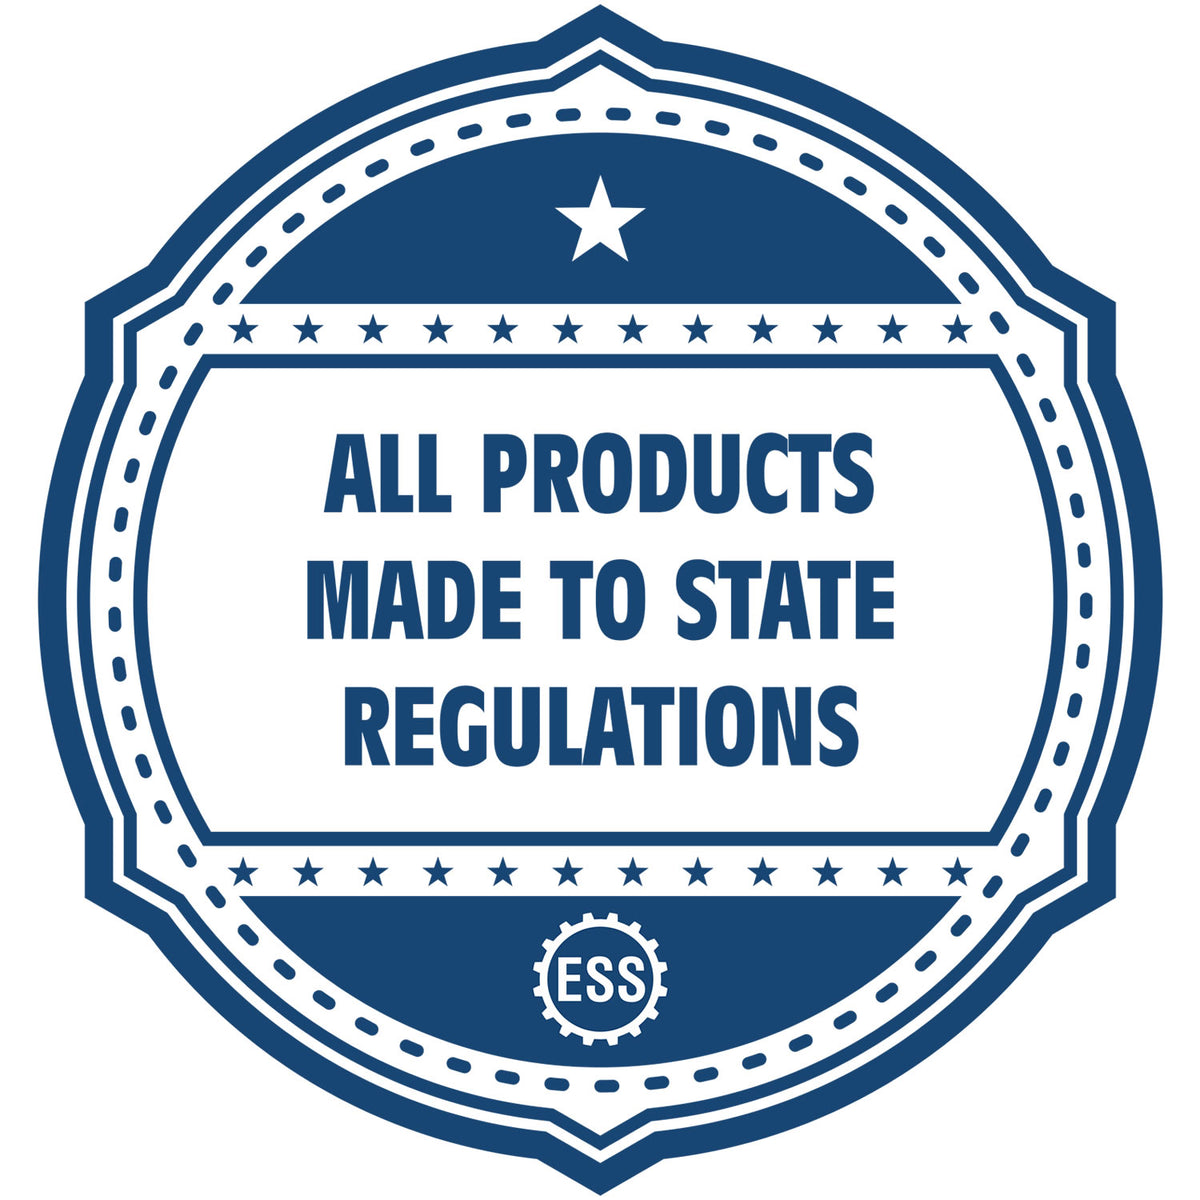 An icon or badge element for the Super Slim North Dakota Notary Public Stamp showing that this product is made in compliance with state regulations.